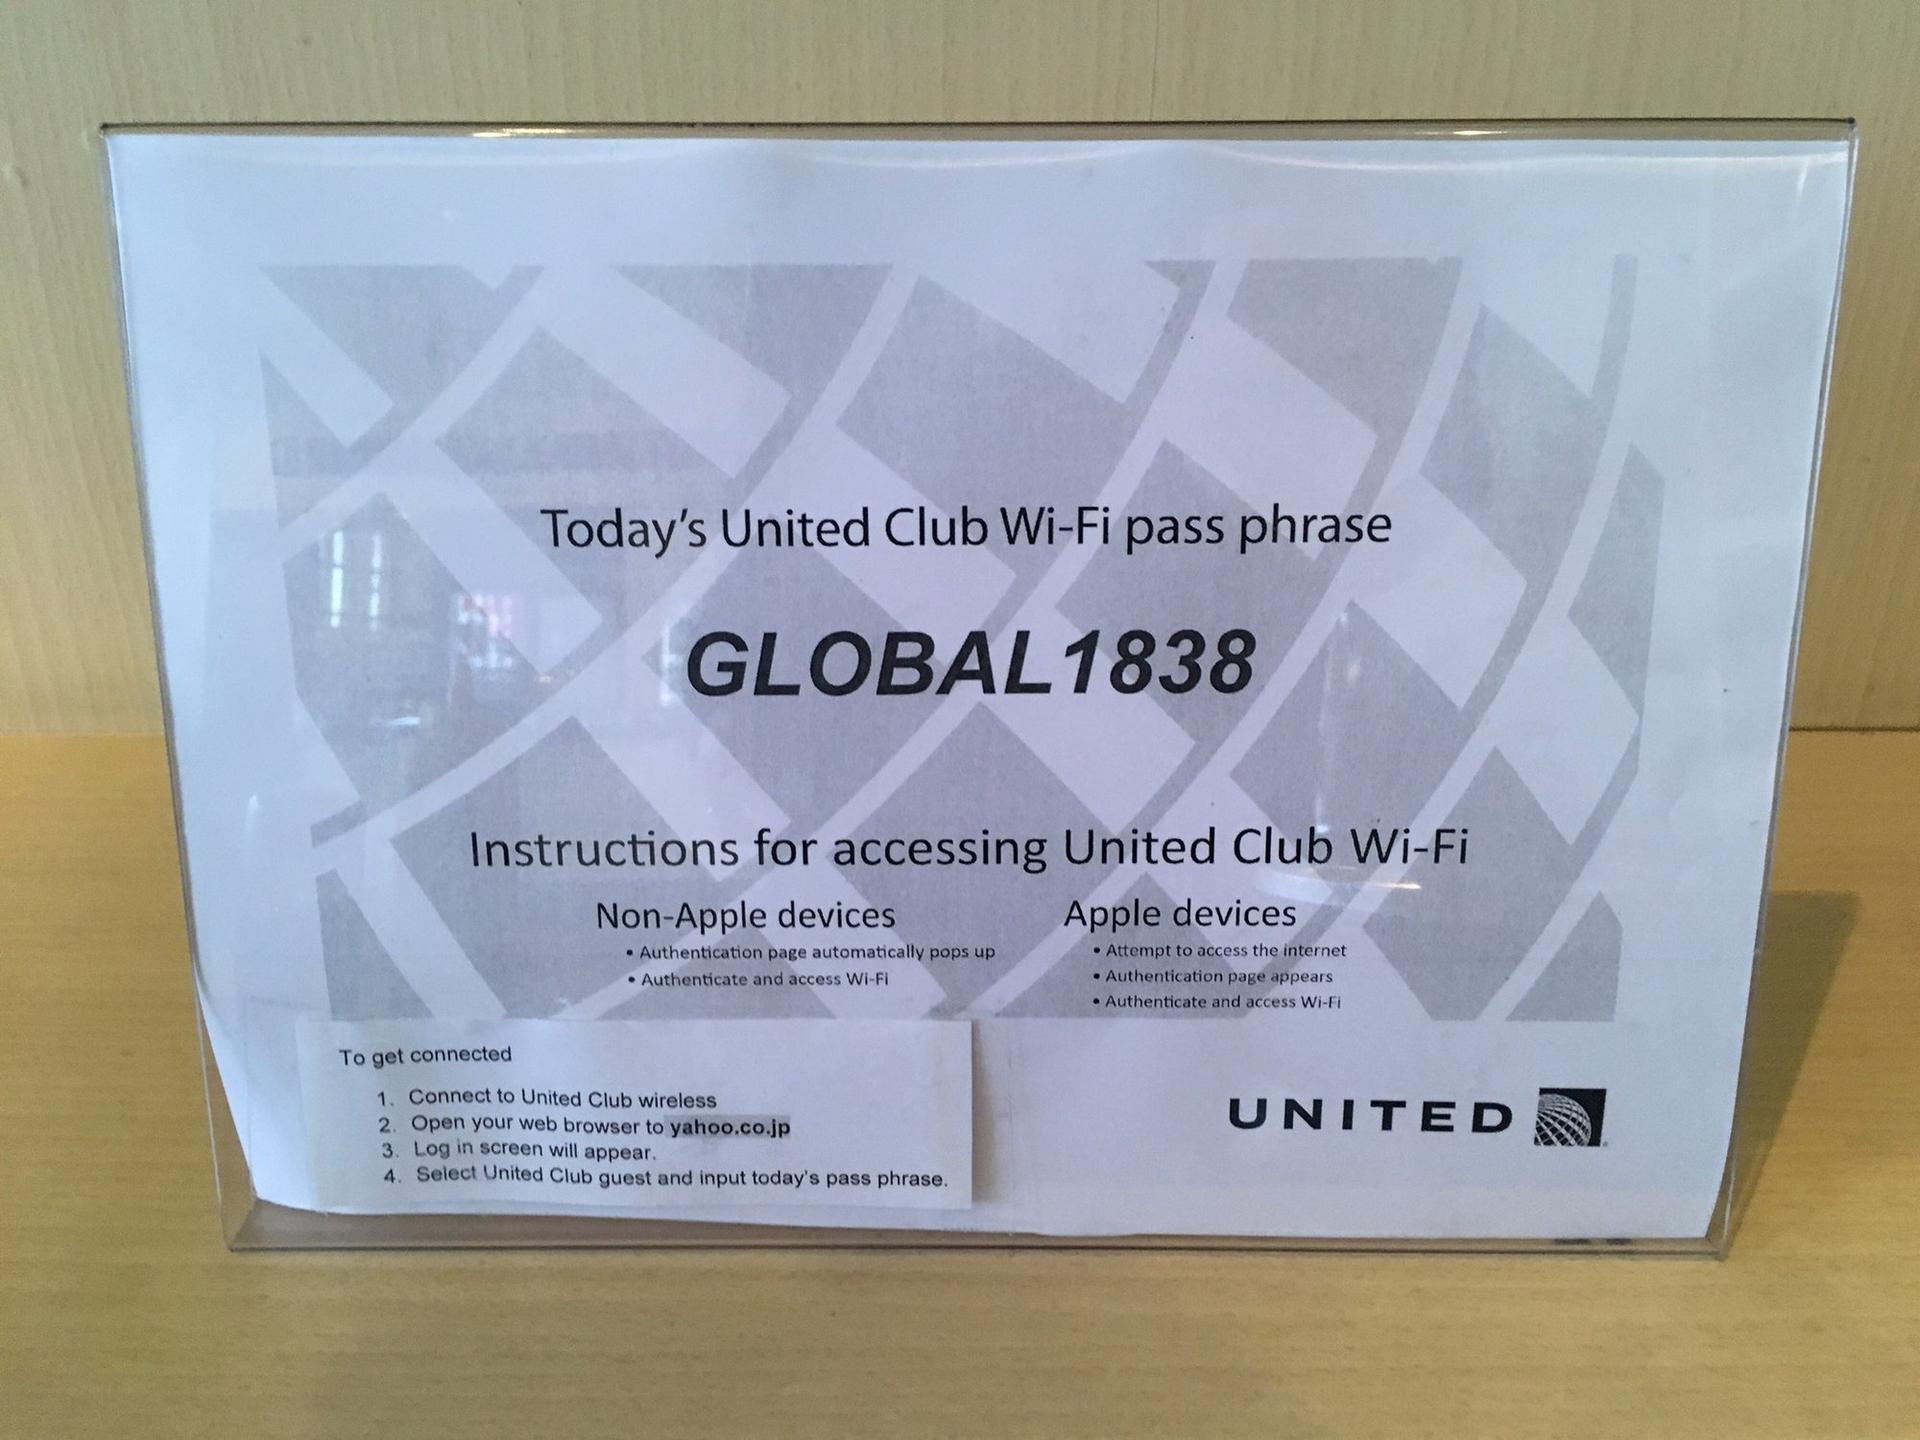 United Airlines United Club image 38 of 52